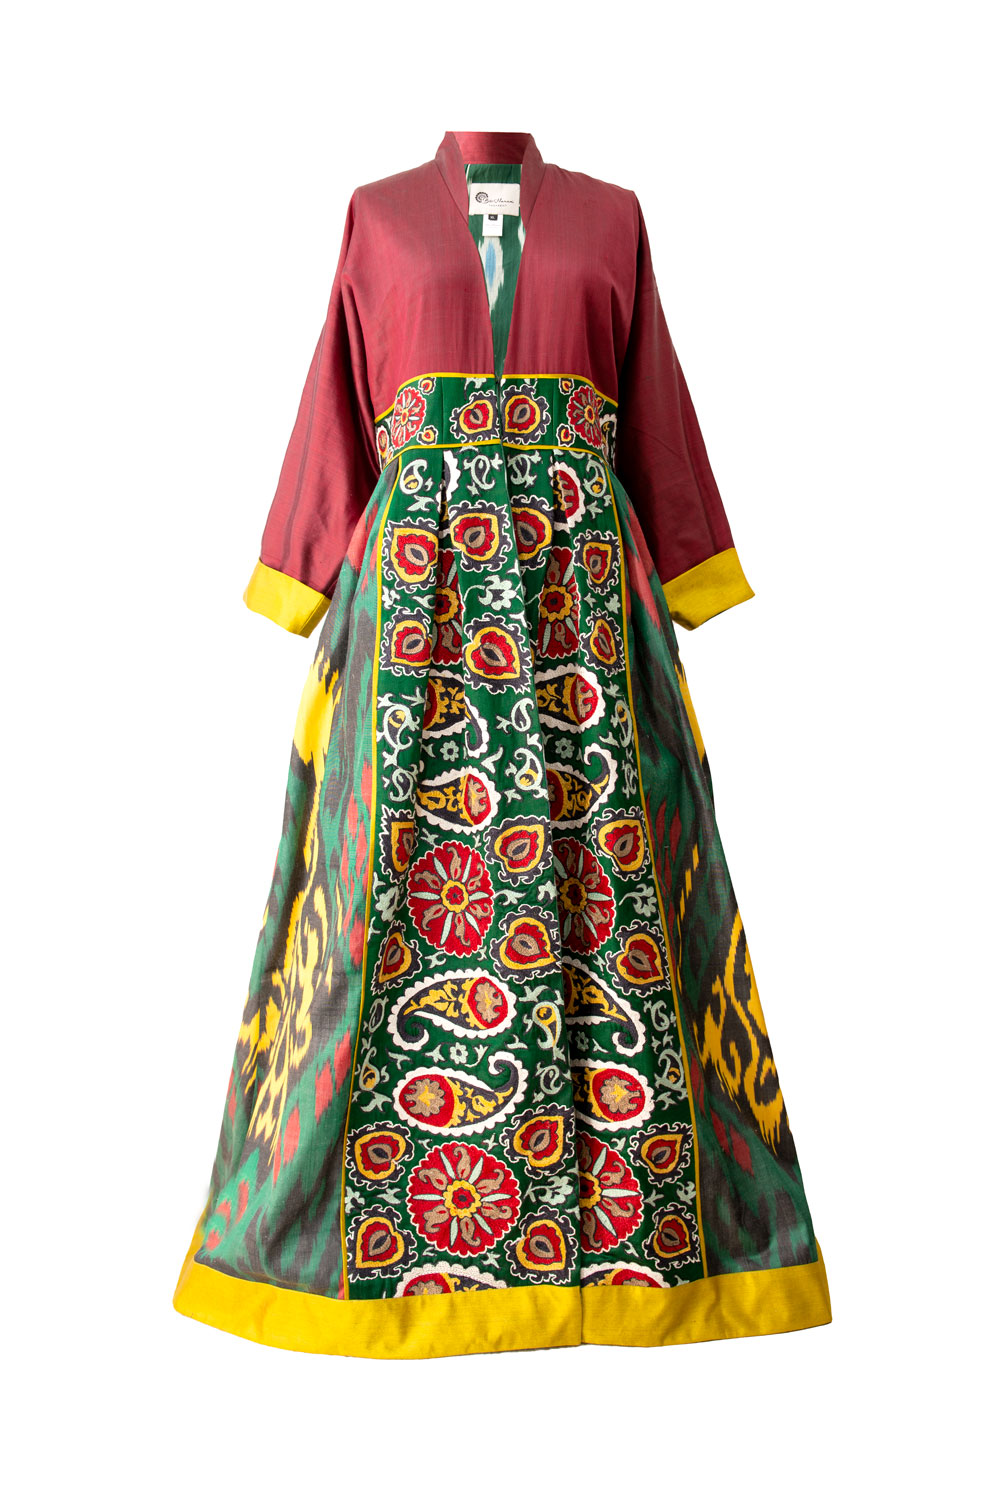 nakoming Pionier mixer One-of-a-Kind Luxury Silk Ikat Kaftan with Suzani Embroidery IK661 –  Welcome – Bibi Hanum – Online shopping for luxury ikat kaftans,  contemporary designer clothes, handicrafts and souvenirs from Uzbekistan